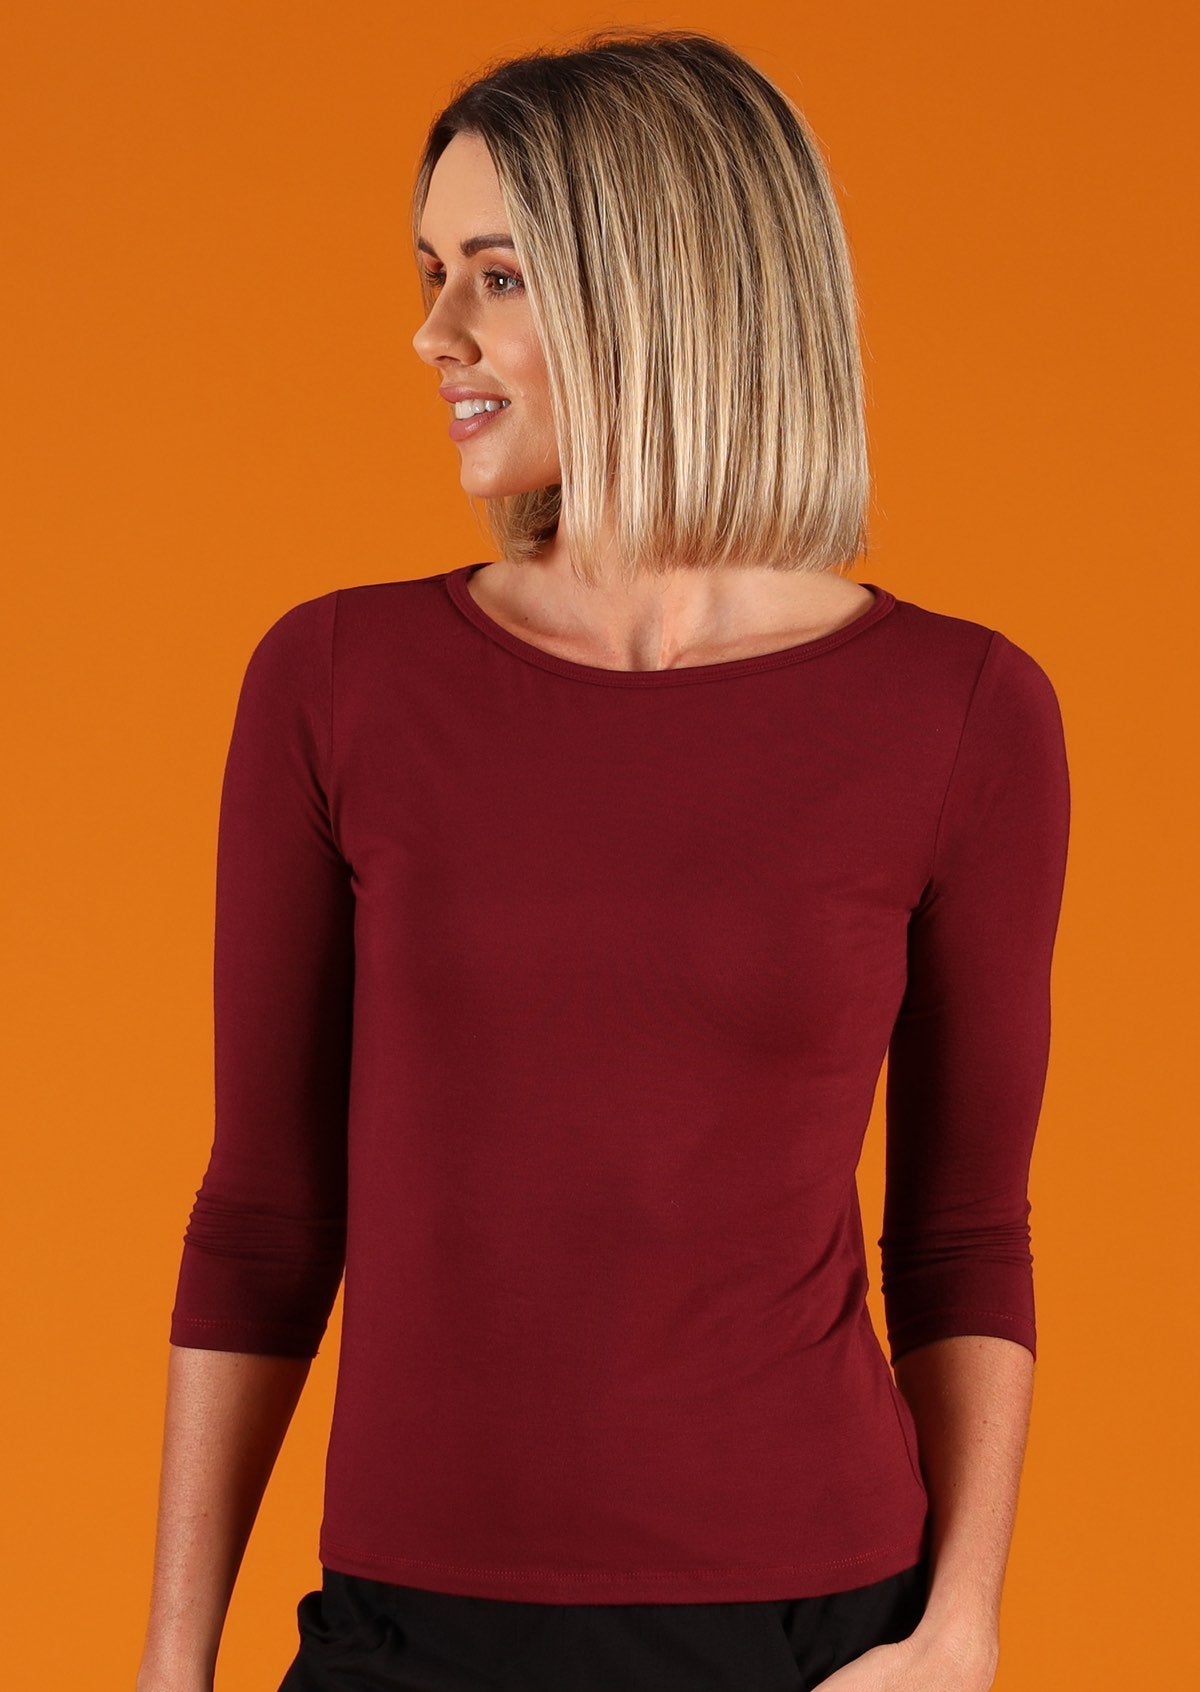 Woman wearing a rayon boat neck maroon 3/4 sleeve top looking to the side.